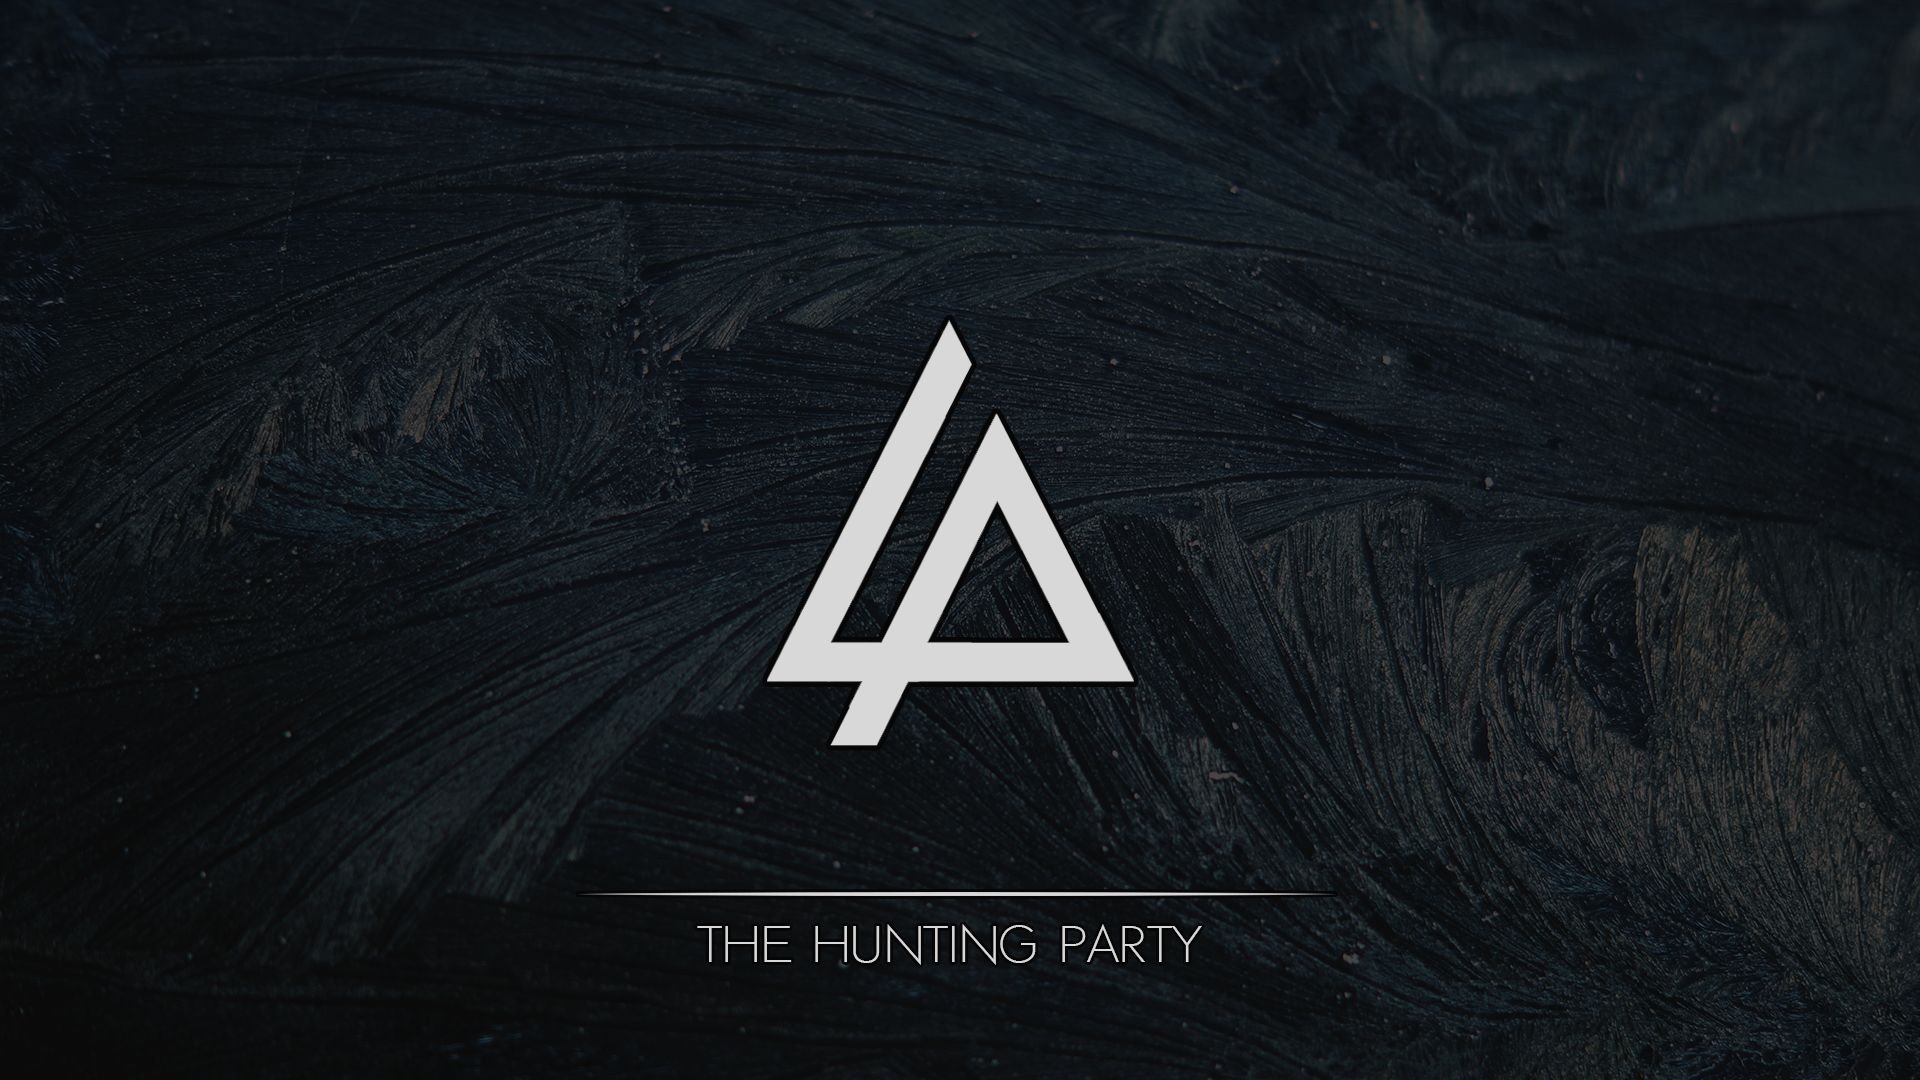 Music, Linkin Park, the hunting party wallpapers is